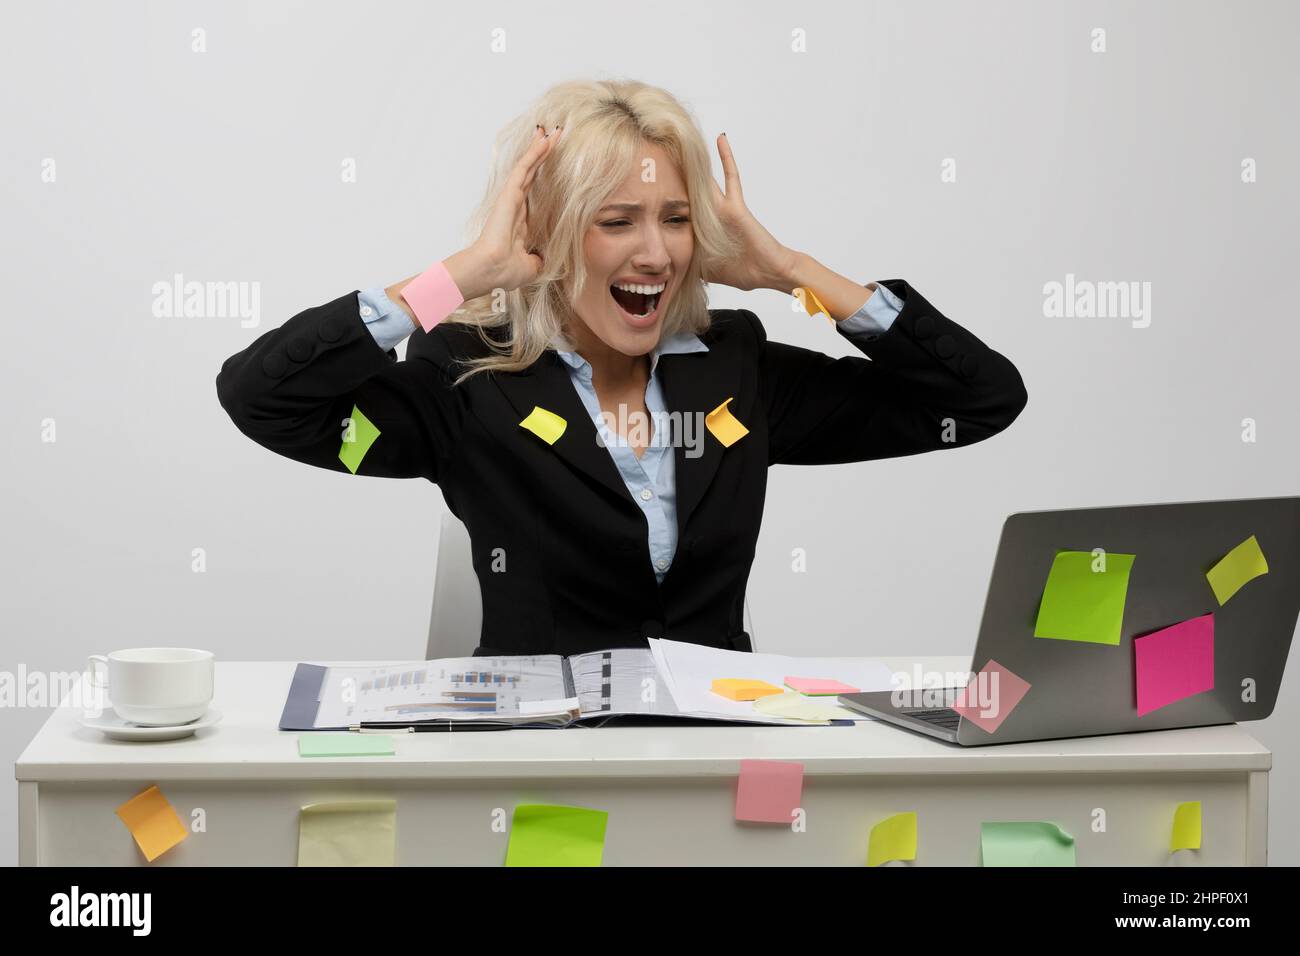 Irritated female office worker covered in sticky papers, got trouble deadline, looking at laptop and touching head Stock Photo